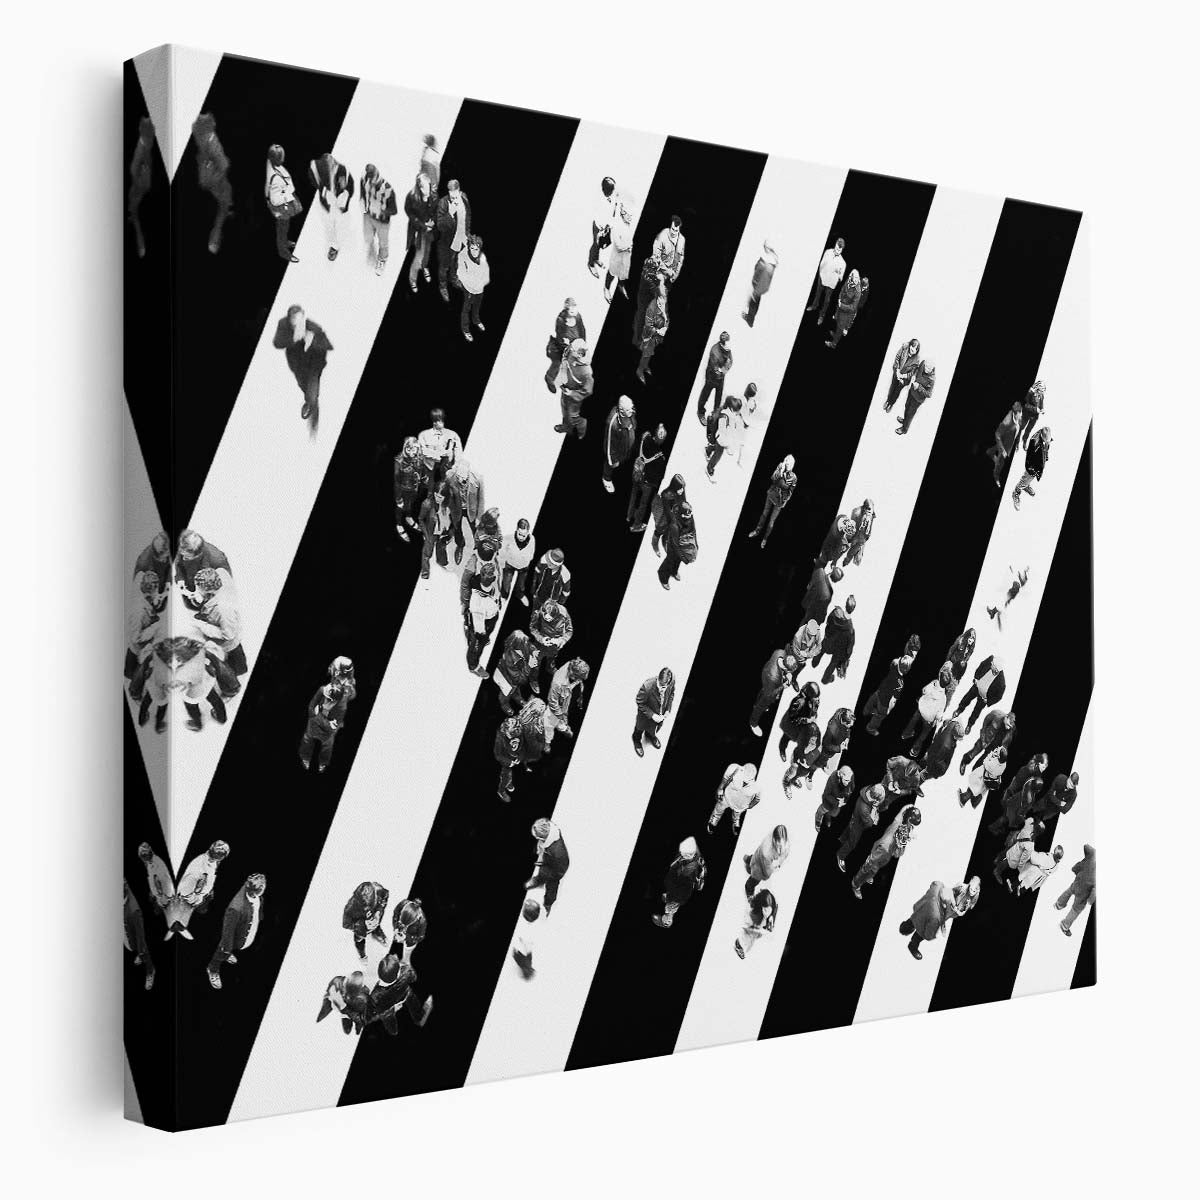 Urban Zebra Crossing Aerial BW Cityscape Wall Art by Luxuriance Designs. Made in USA.